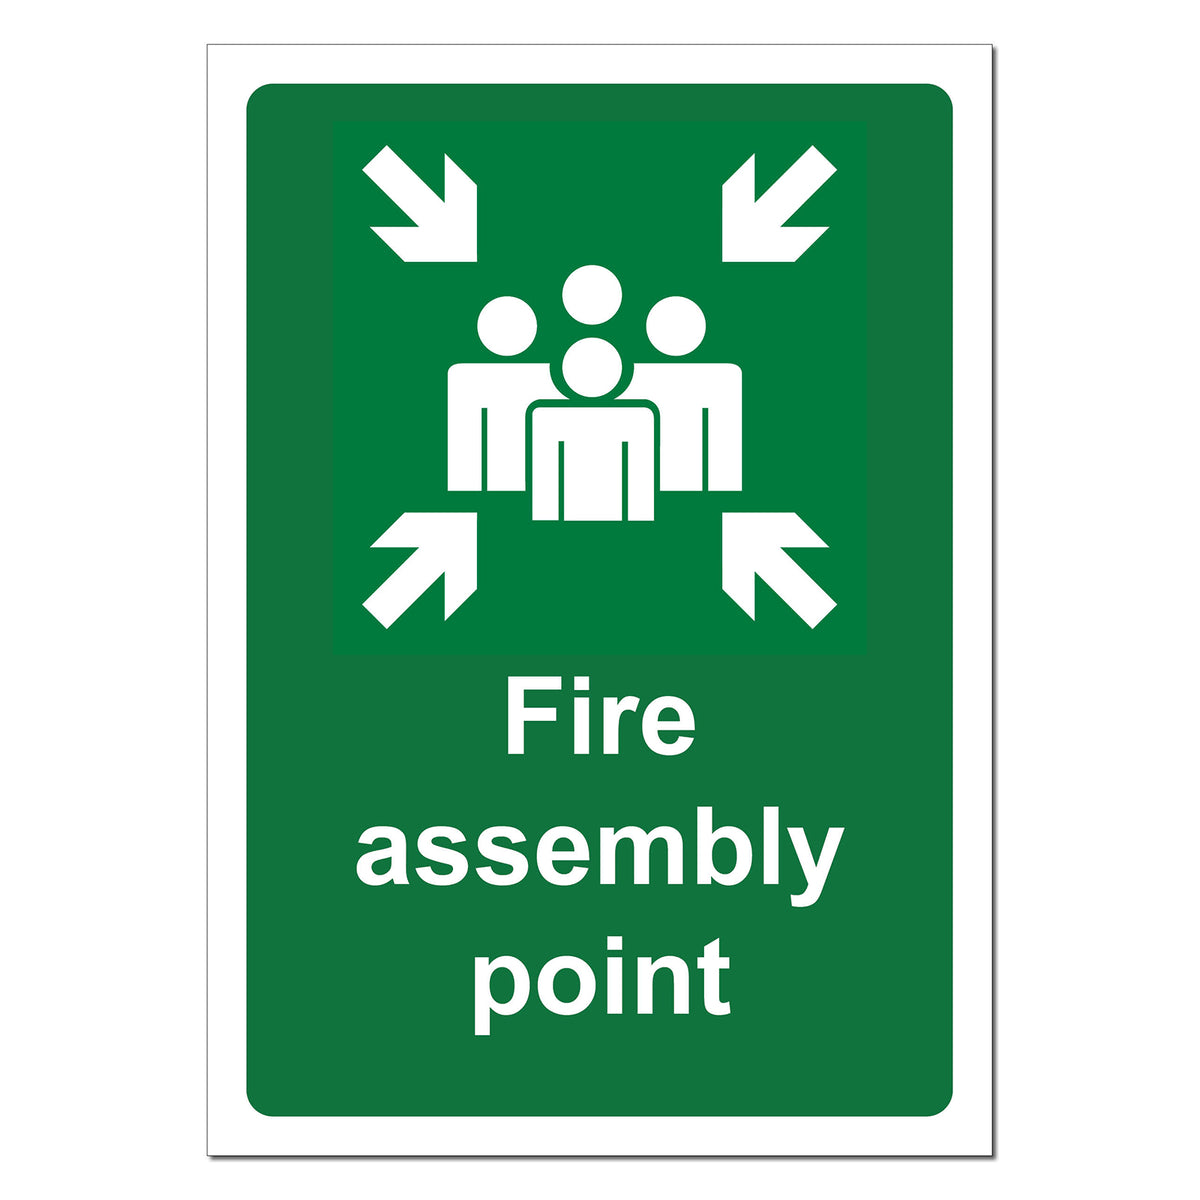 What Colour Would A Fire Assembly Point Sign Be